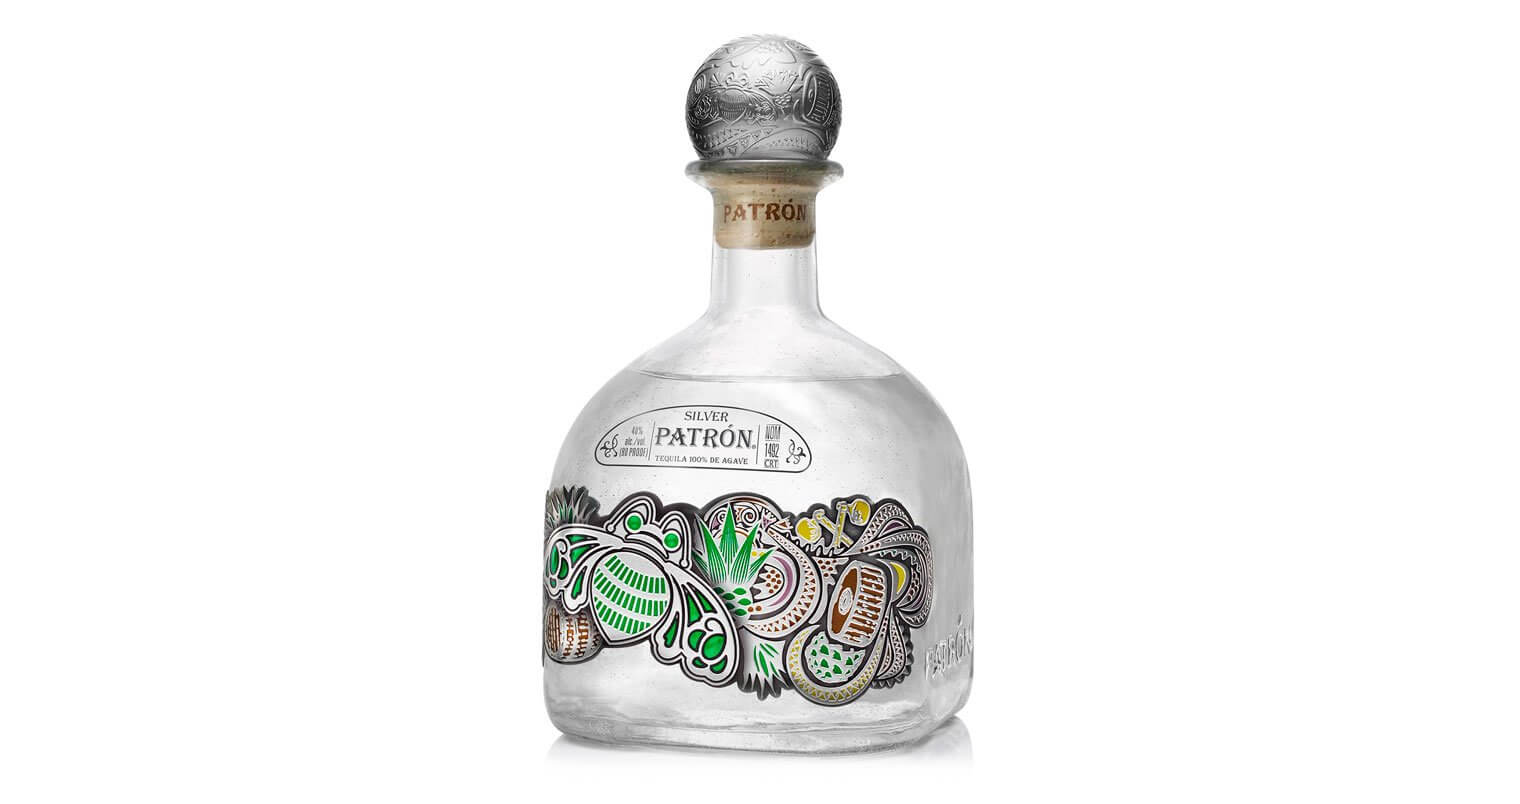 Patrón Silver One-Liter Limited-Edition Bottle, on white featured image